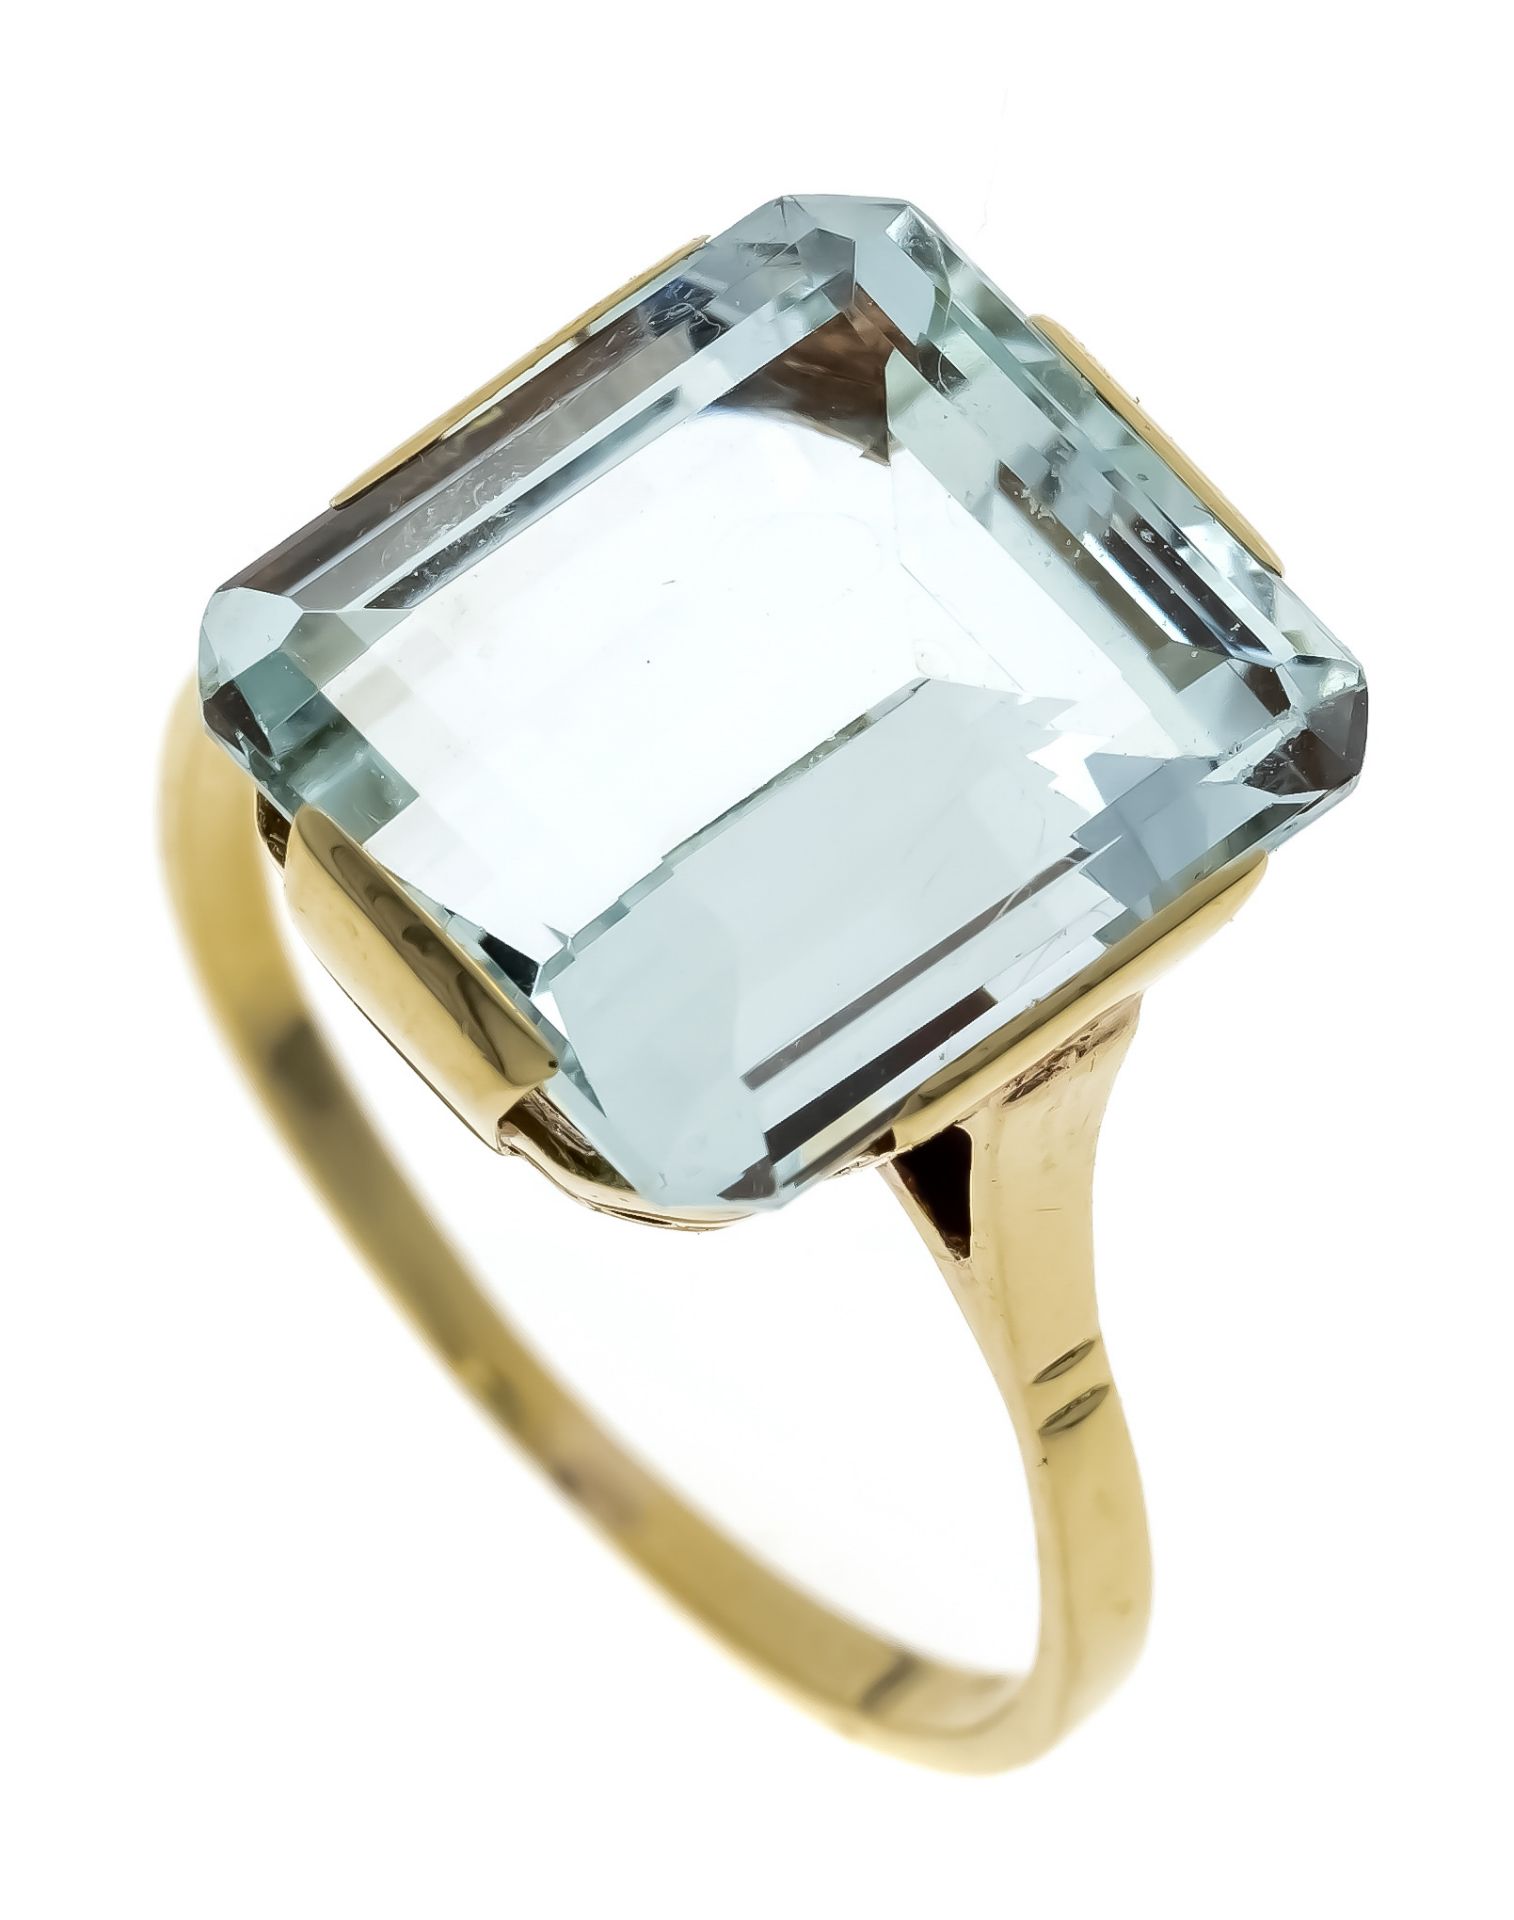 Aquamarine ring GG 585/000 unstamped, tested, with an emerald cut faceted aquamarine 12,8 x 11,5